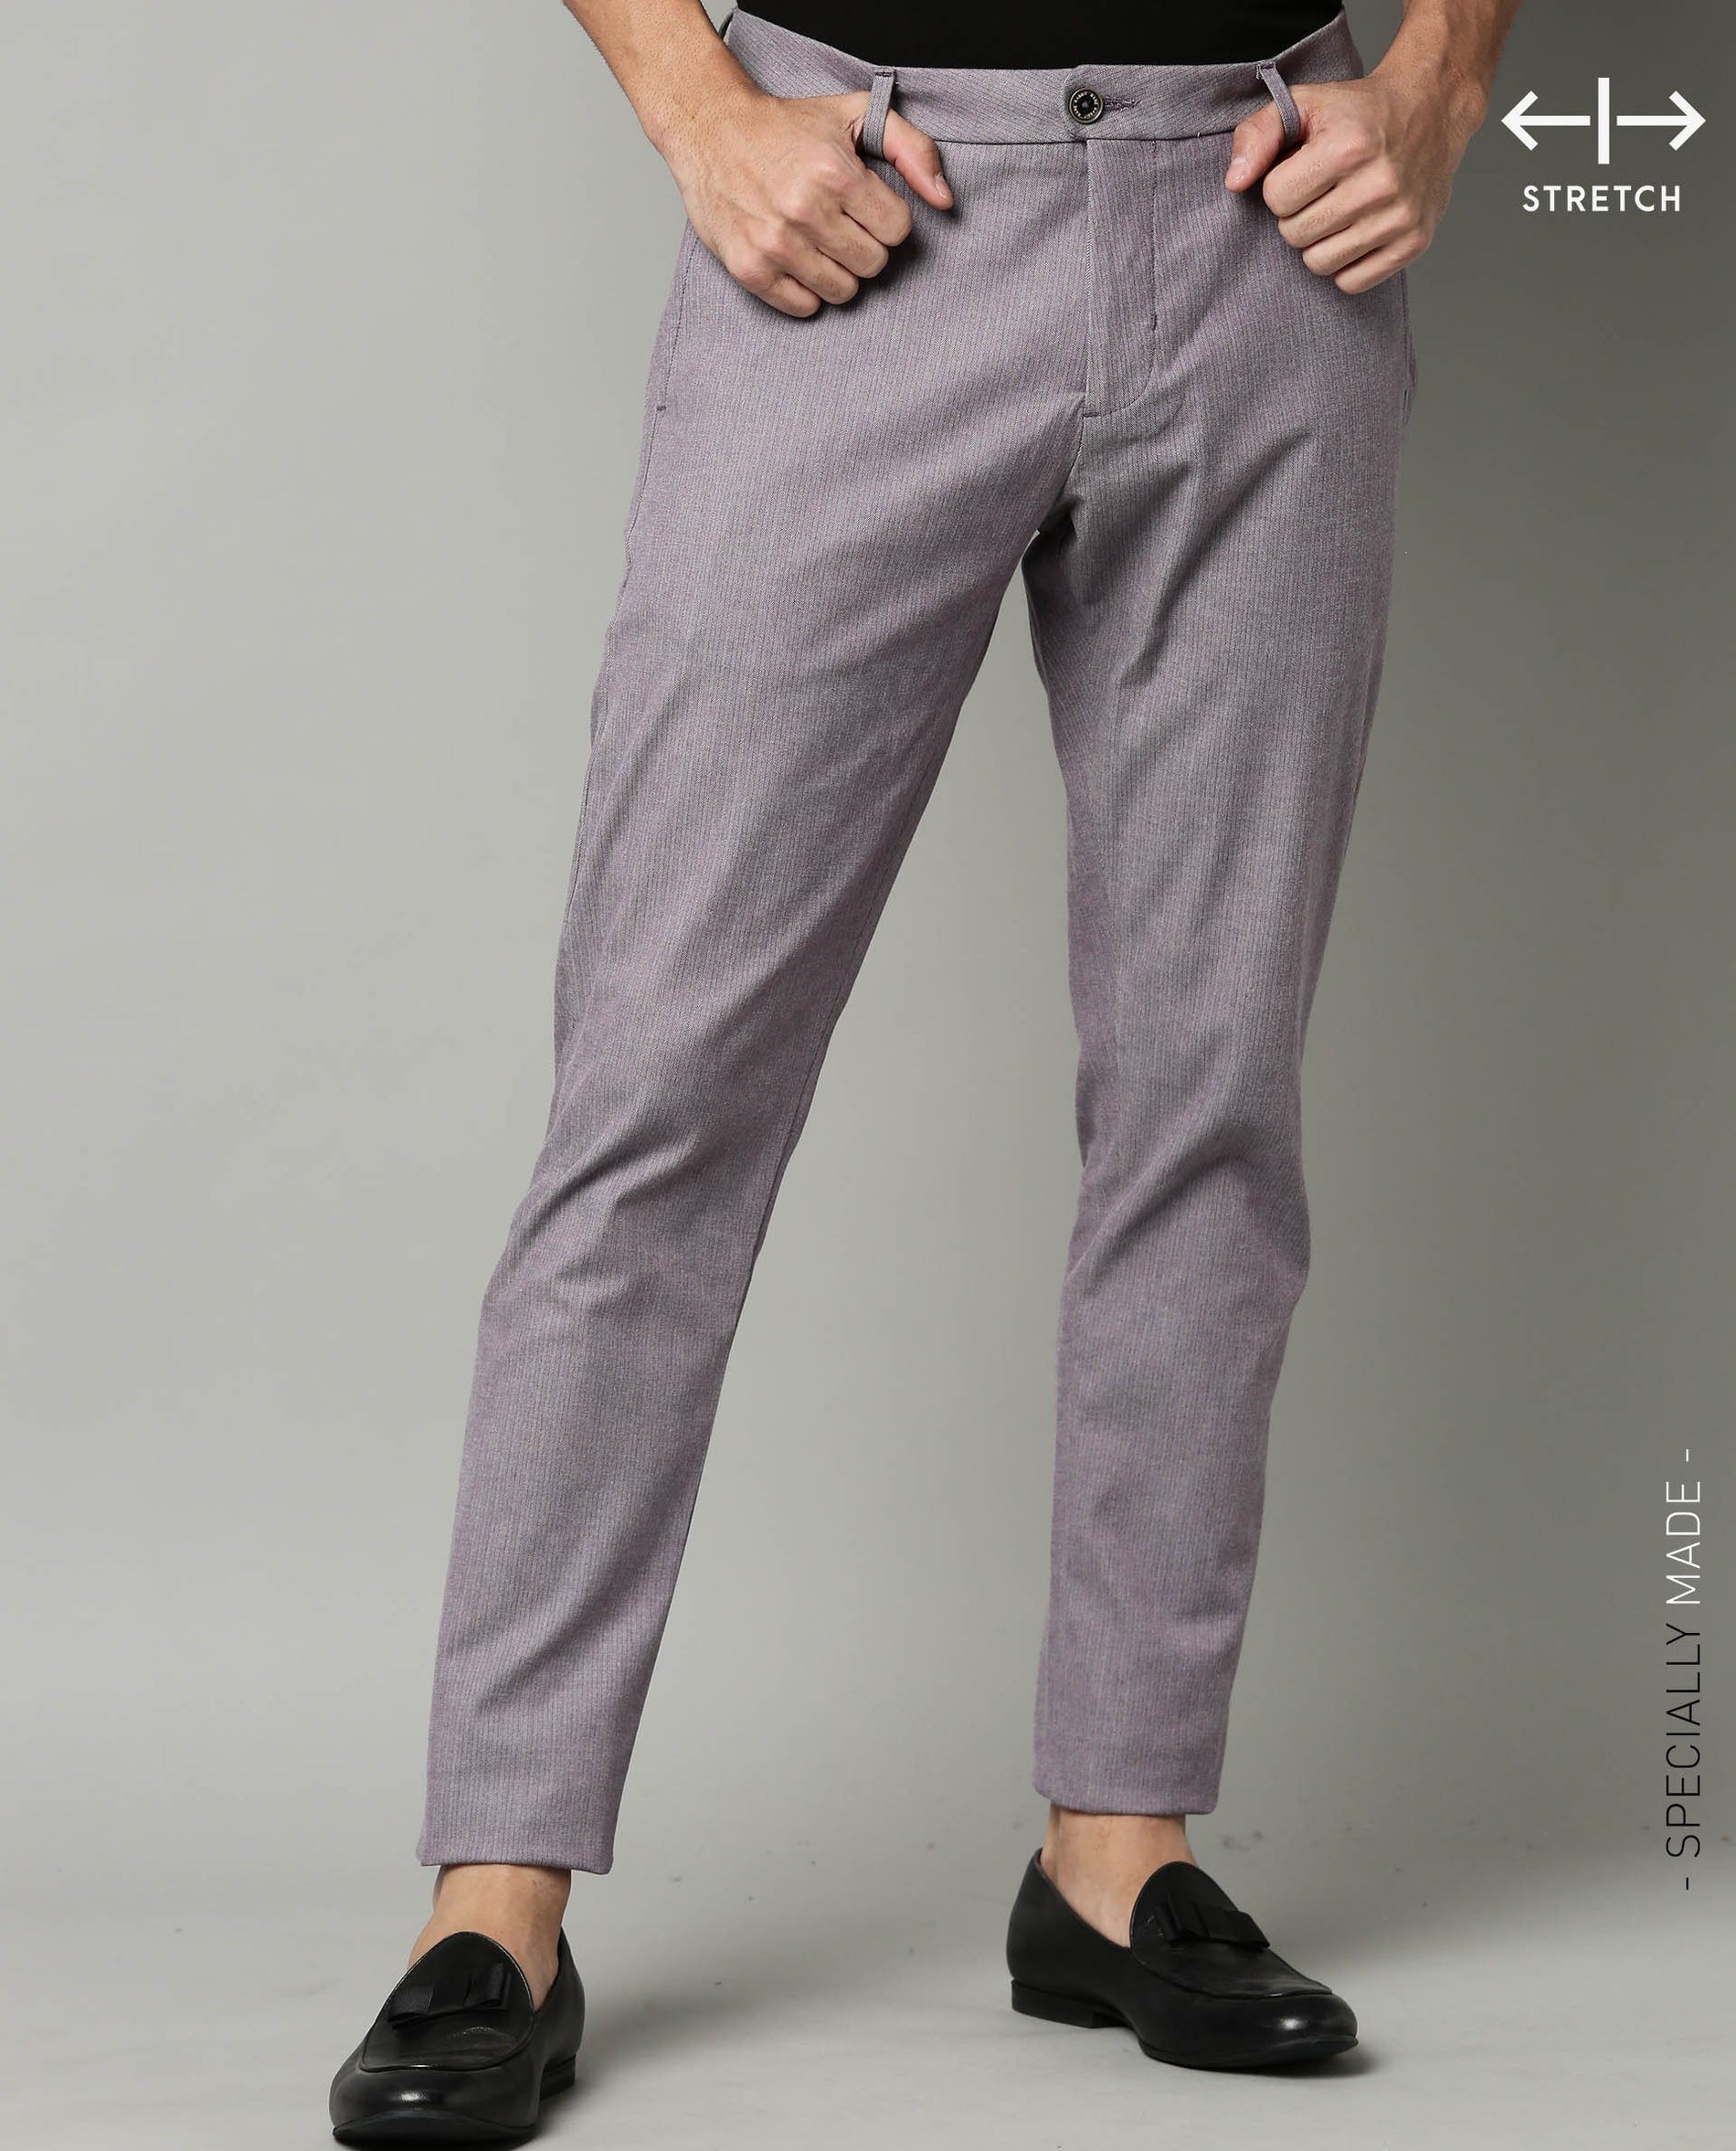 Trouser Pants Mens, Men’s Casual Trousers - The House of Rare